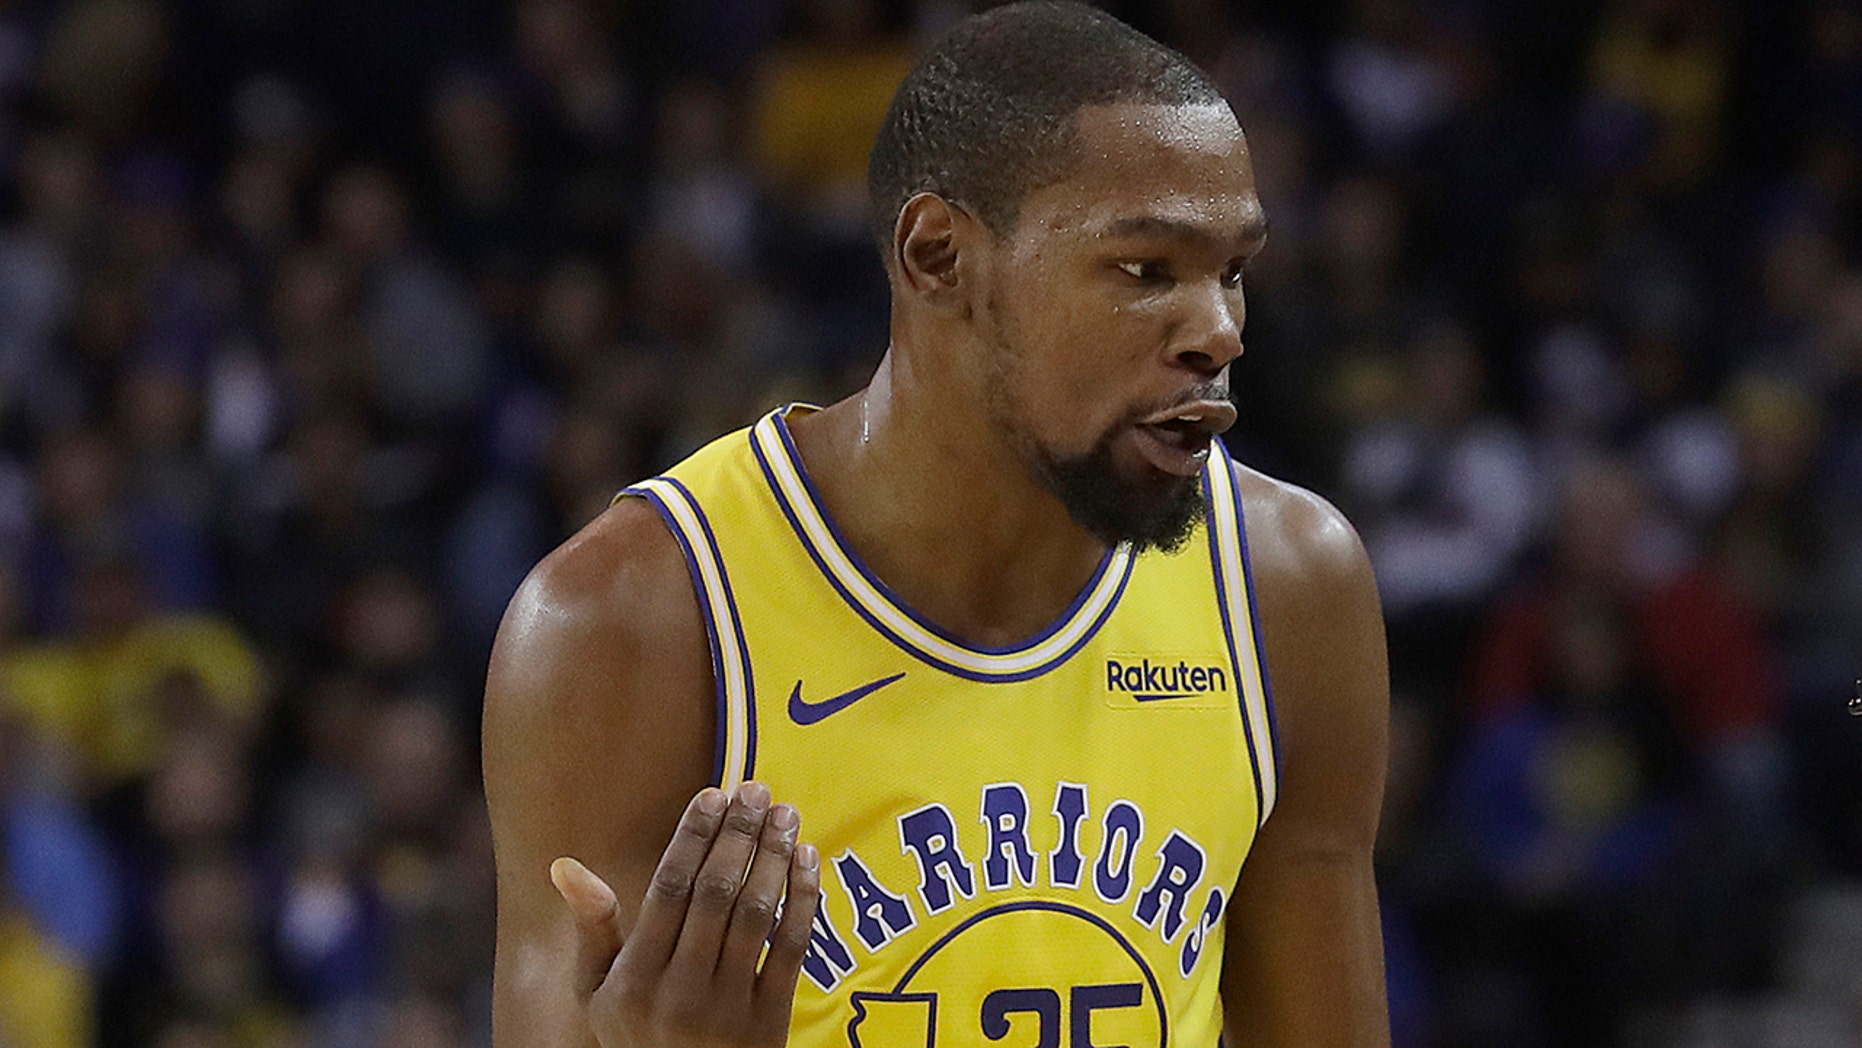 Striker Kevin Durant (35) of the Golden State Warriors meets with referee Brian Forte during the first half of an NBA basketball game between the Warriors and the Phoenix Suns in Oakland , California, Sunday, March 10, 2019. (AP Photo / Jeff Chiu)